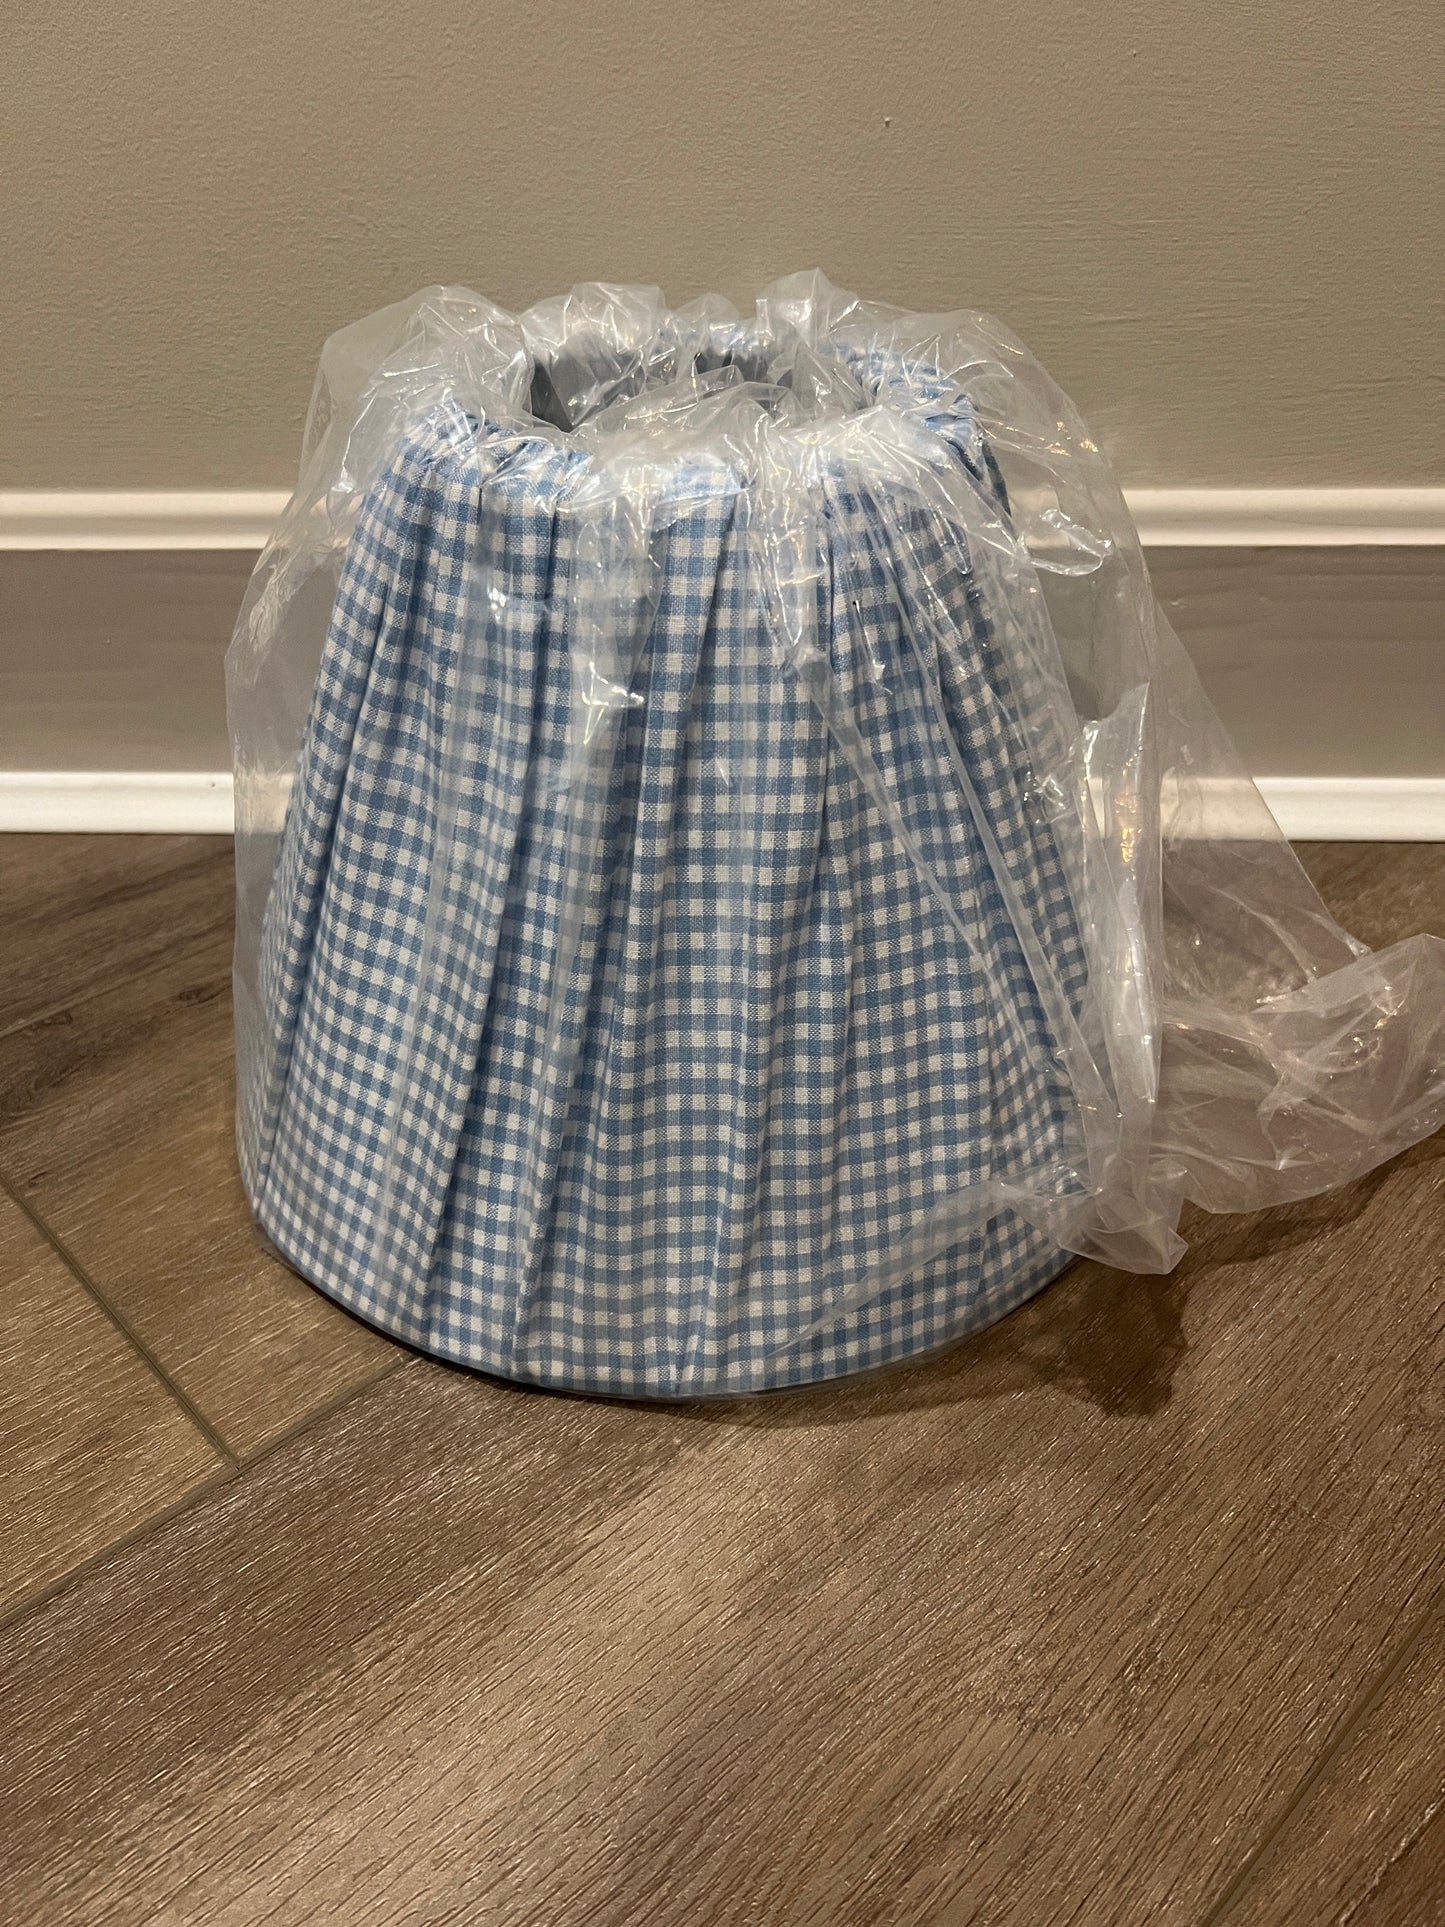 Blue and white lamp shade, NWOT